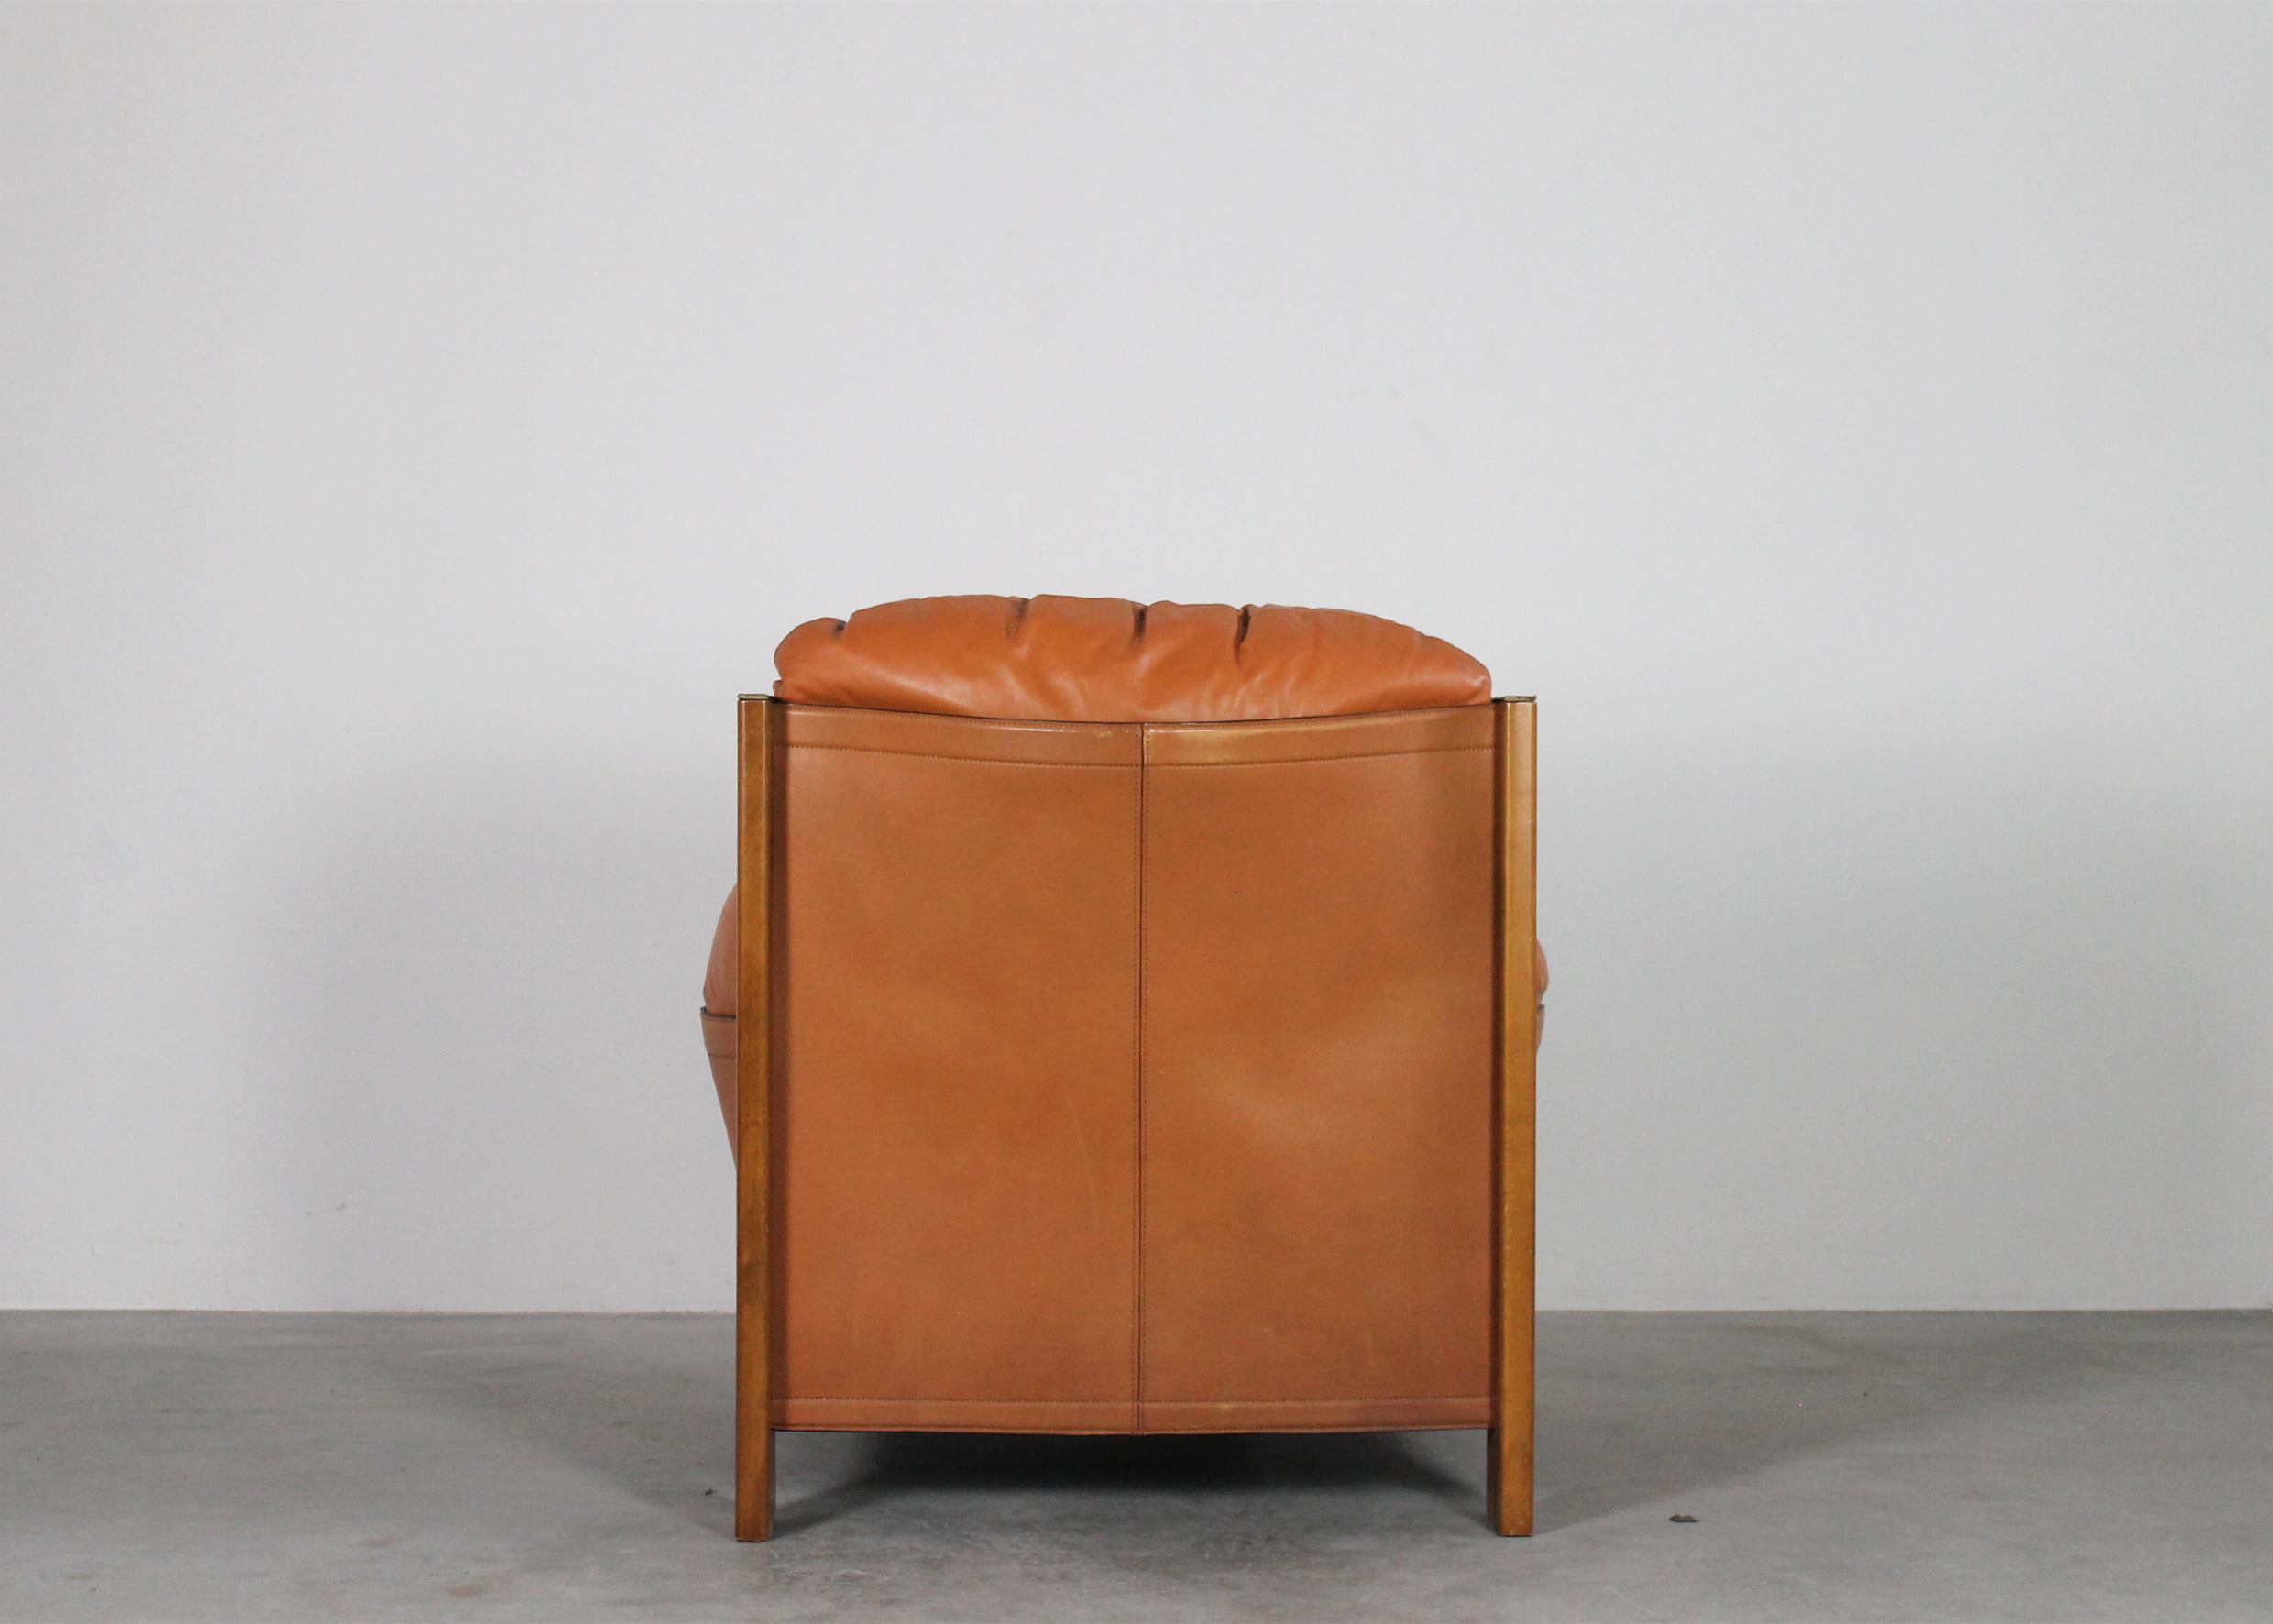 Italian Tobia & Afra Scarpa Armchair in Wood and Leather by Maxalto 1975 Italy For Sale